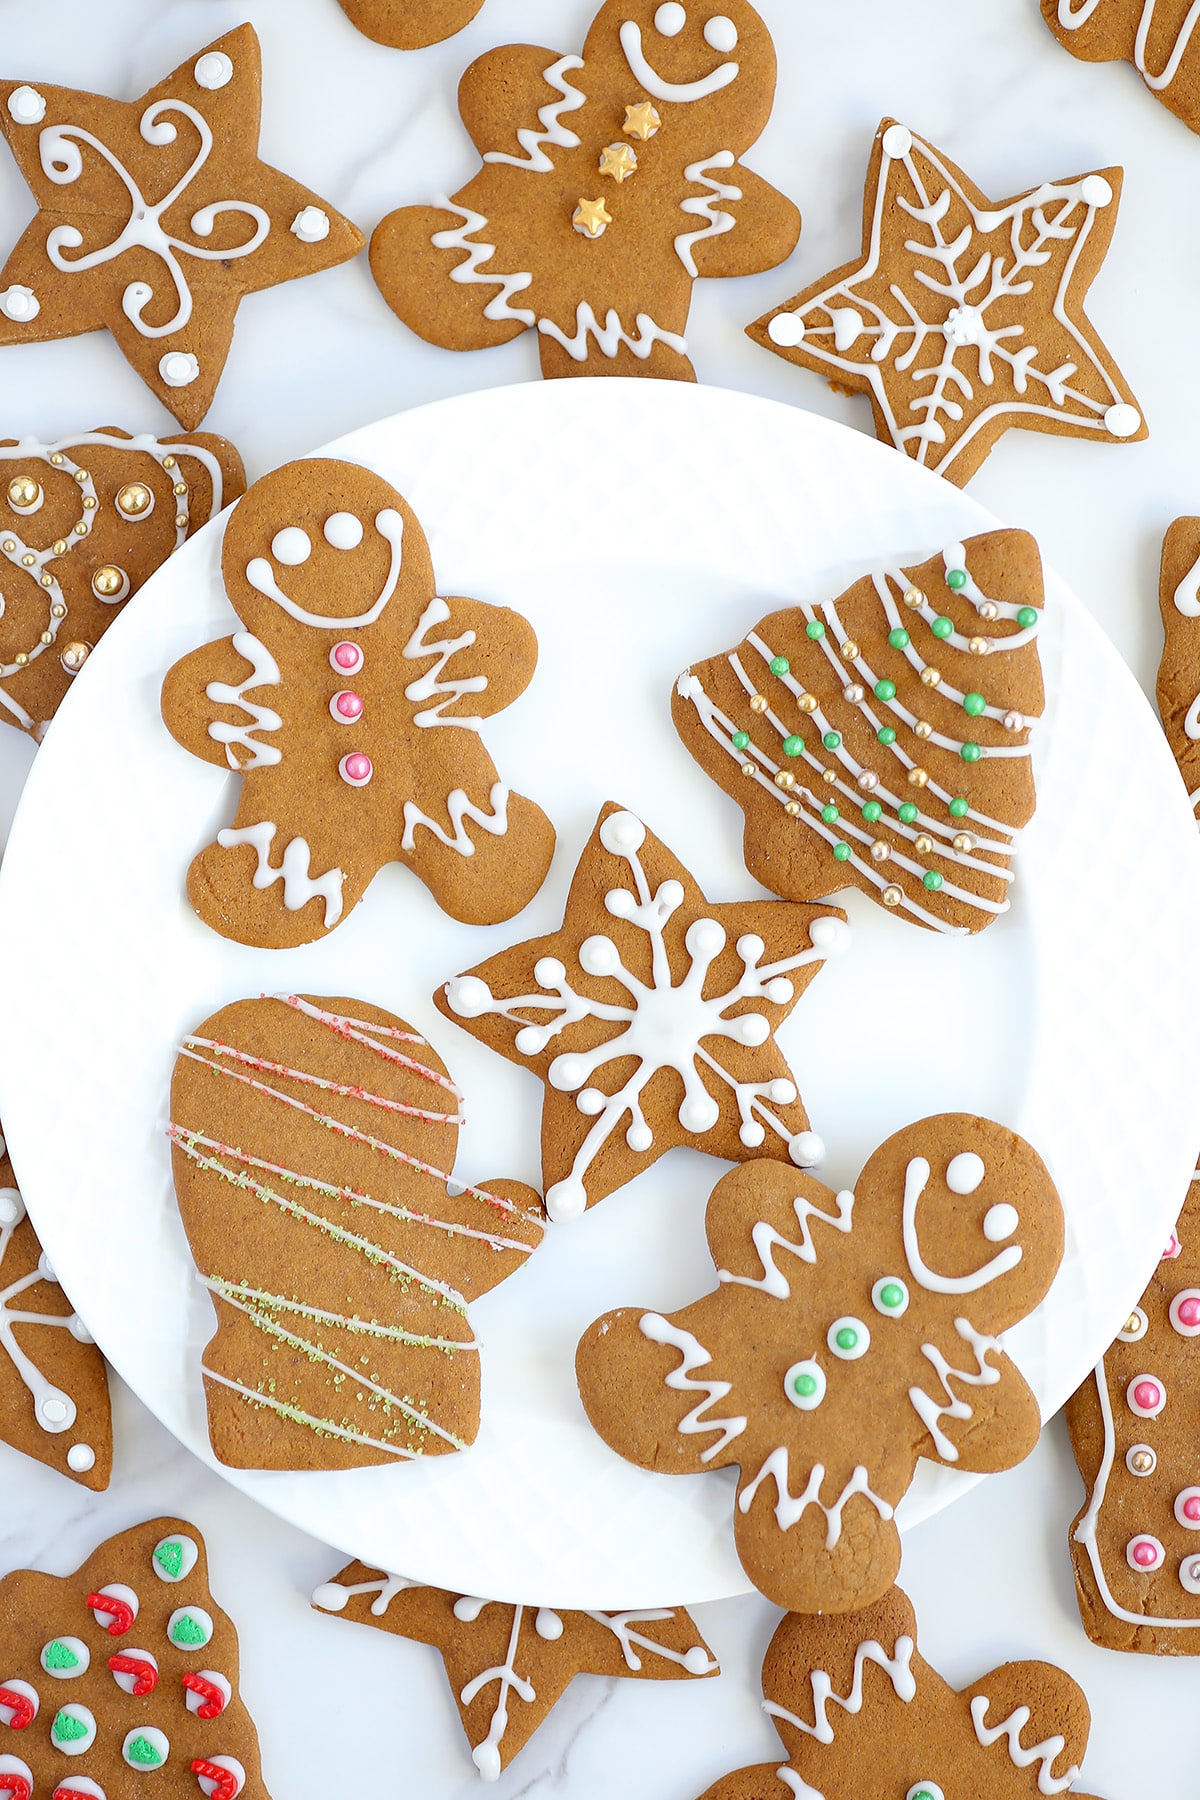 Soft gingerbread cutout cookies decorated with white icing and sprinkles on a serving plate.